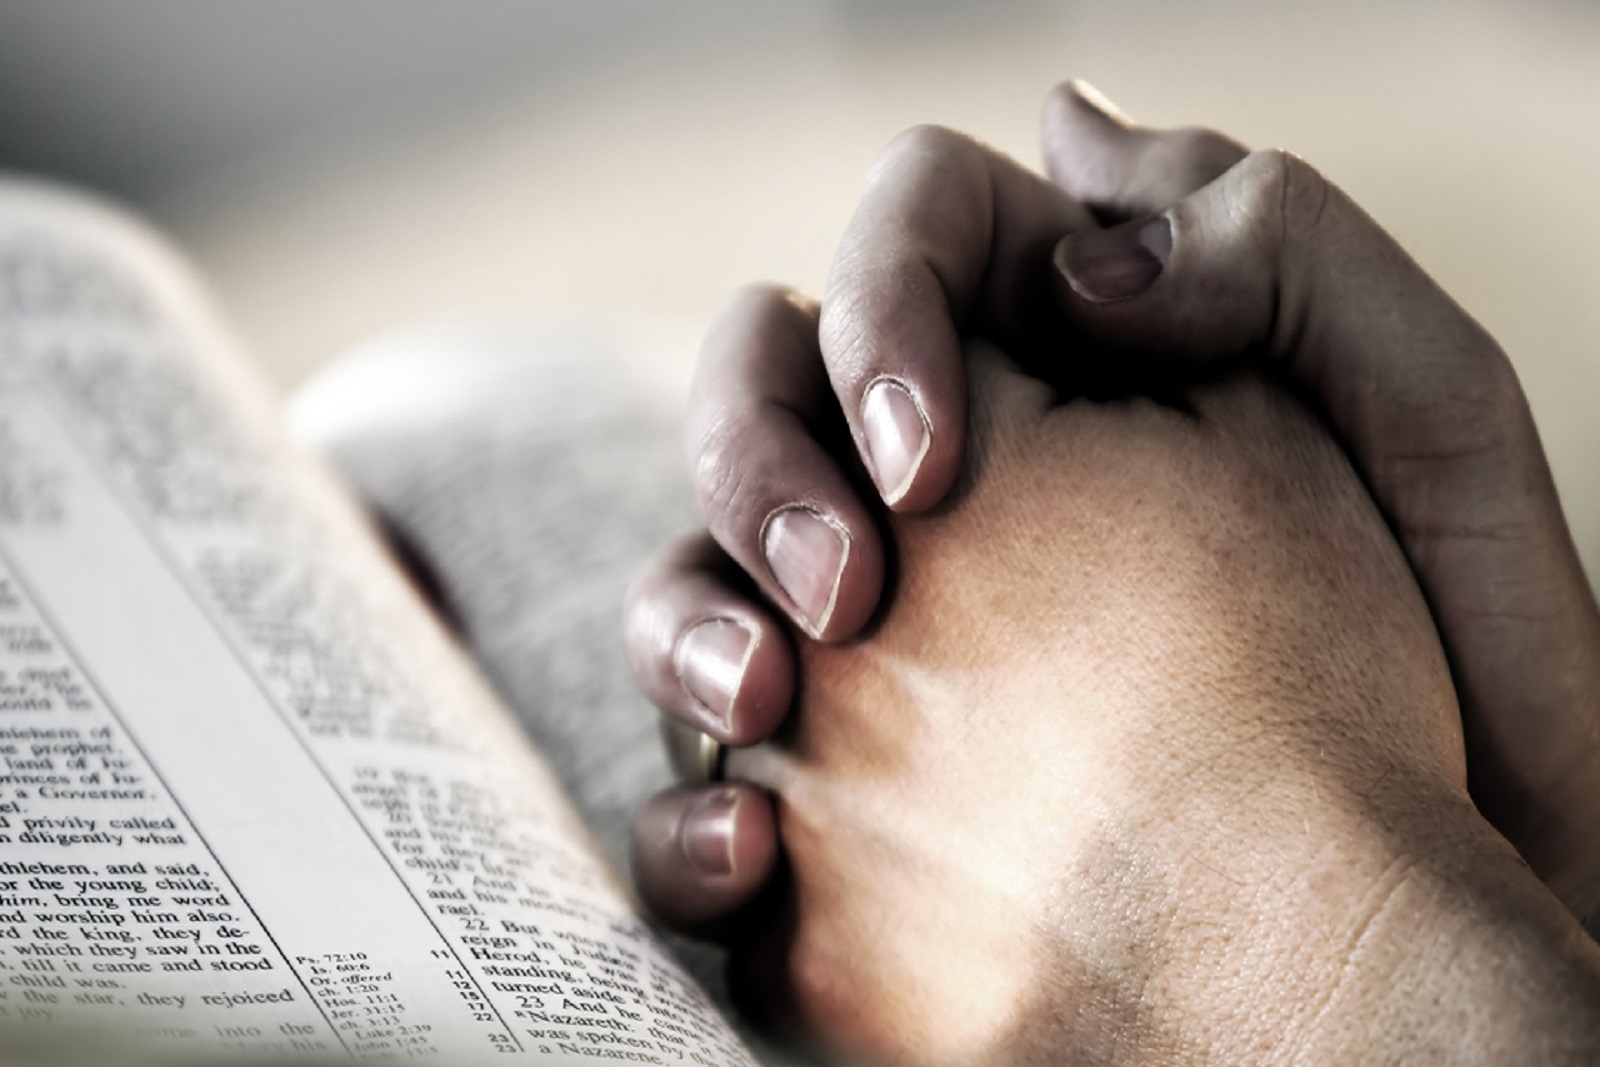 Man's hands folded in prayer over a Holy Bible - represents faith and spirtuality in everyday life.